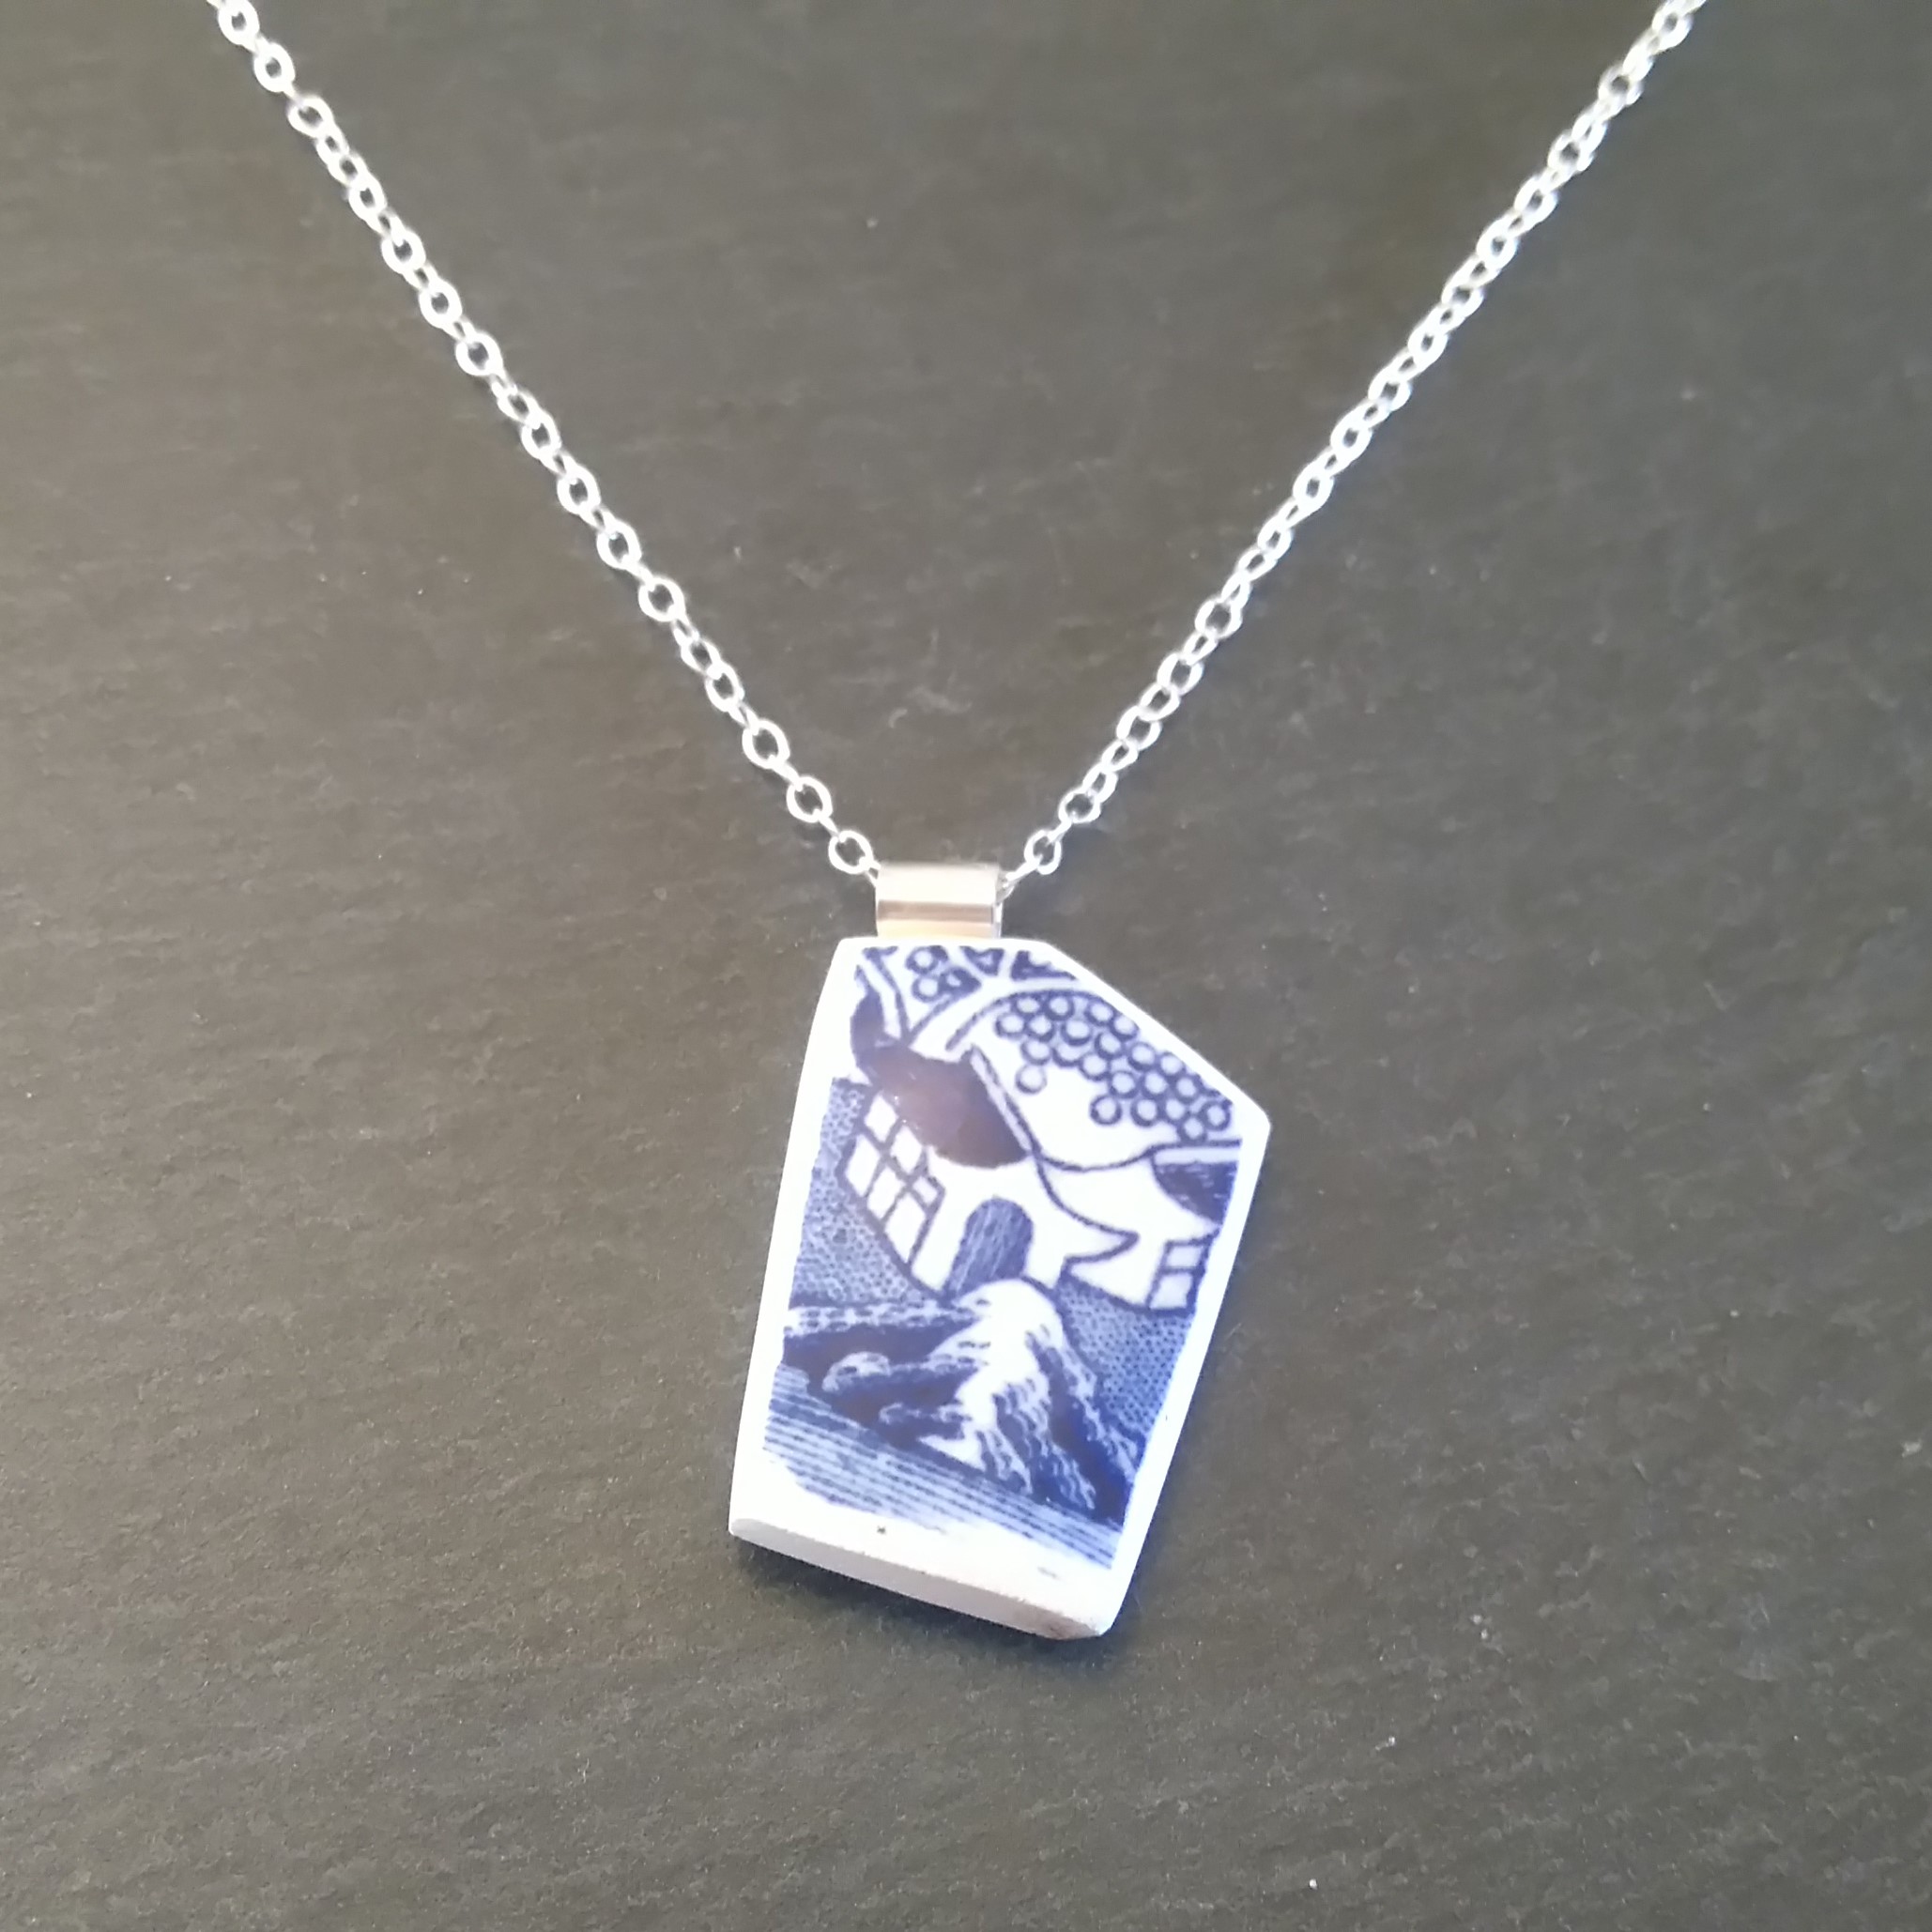 Royal Worcester Willow Pattern - Little House Necklace